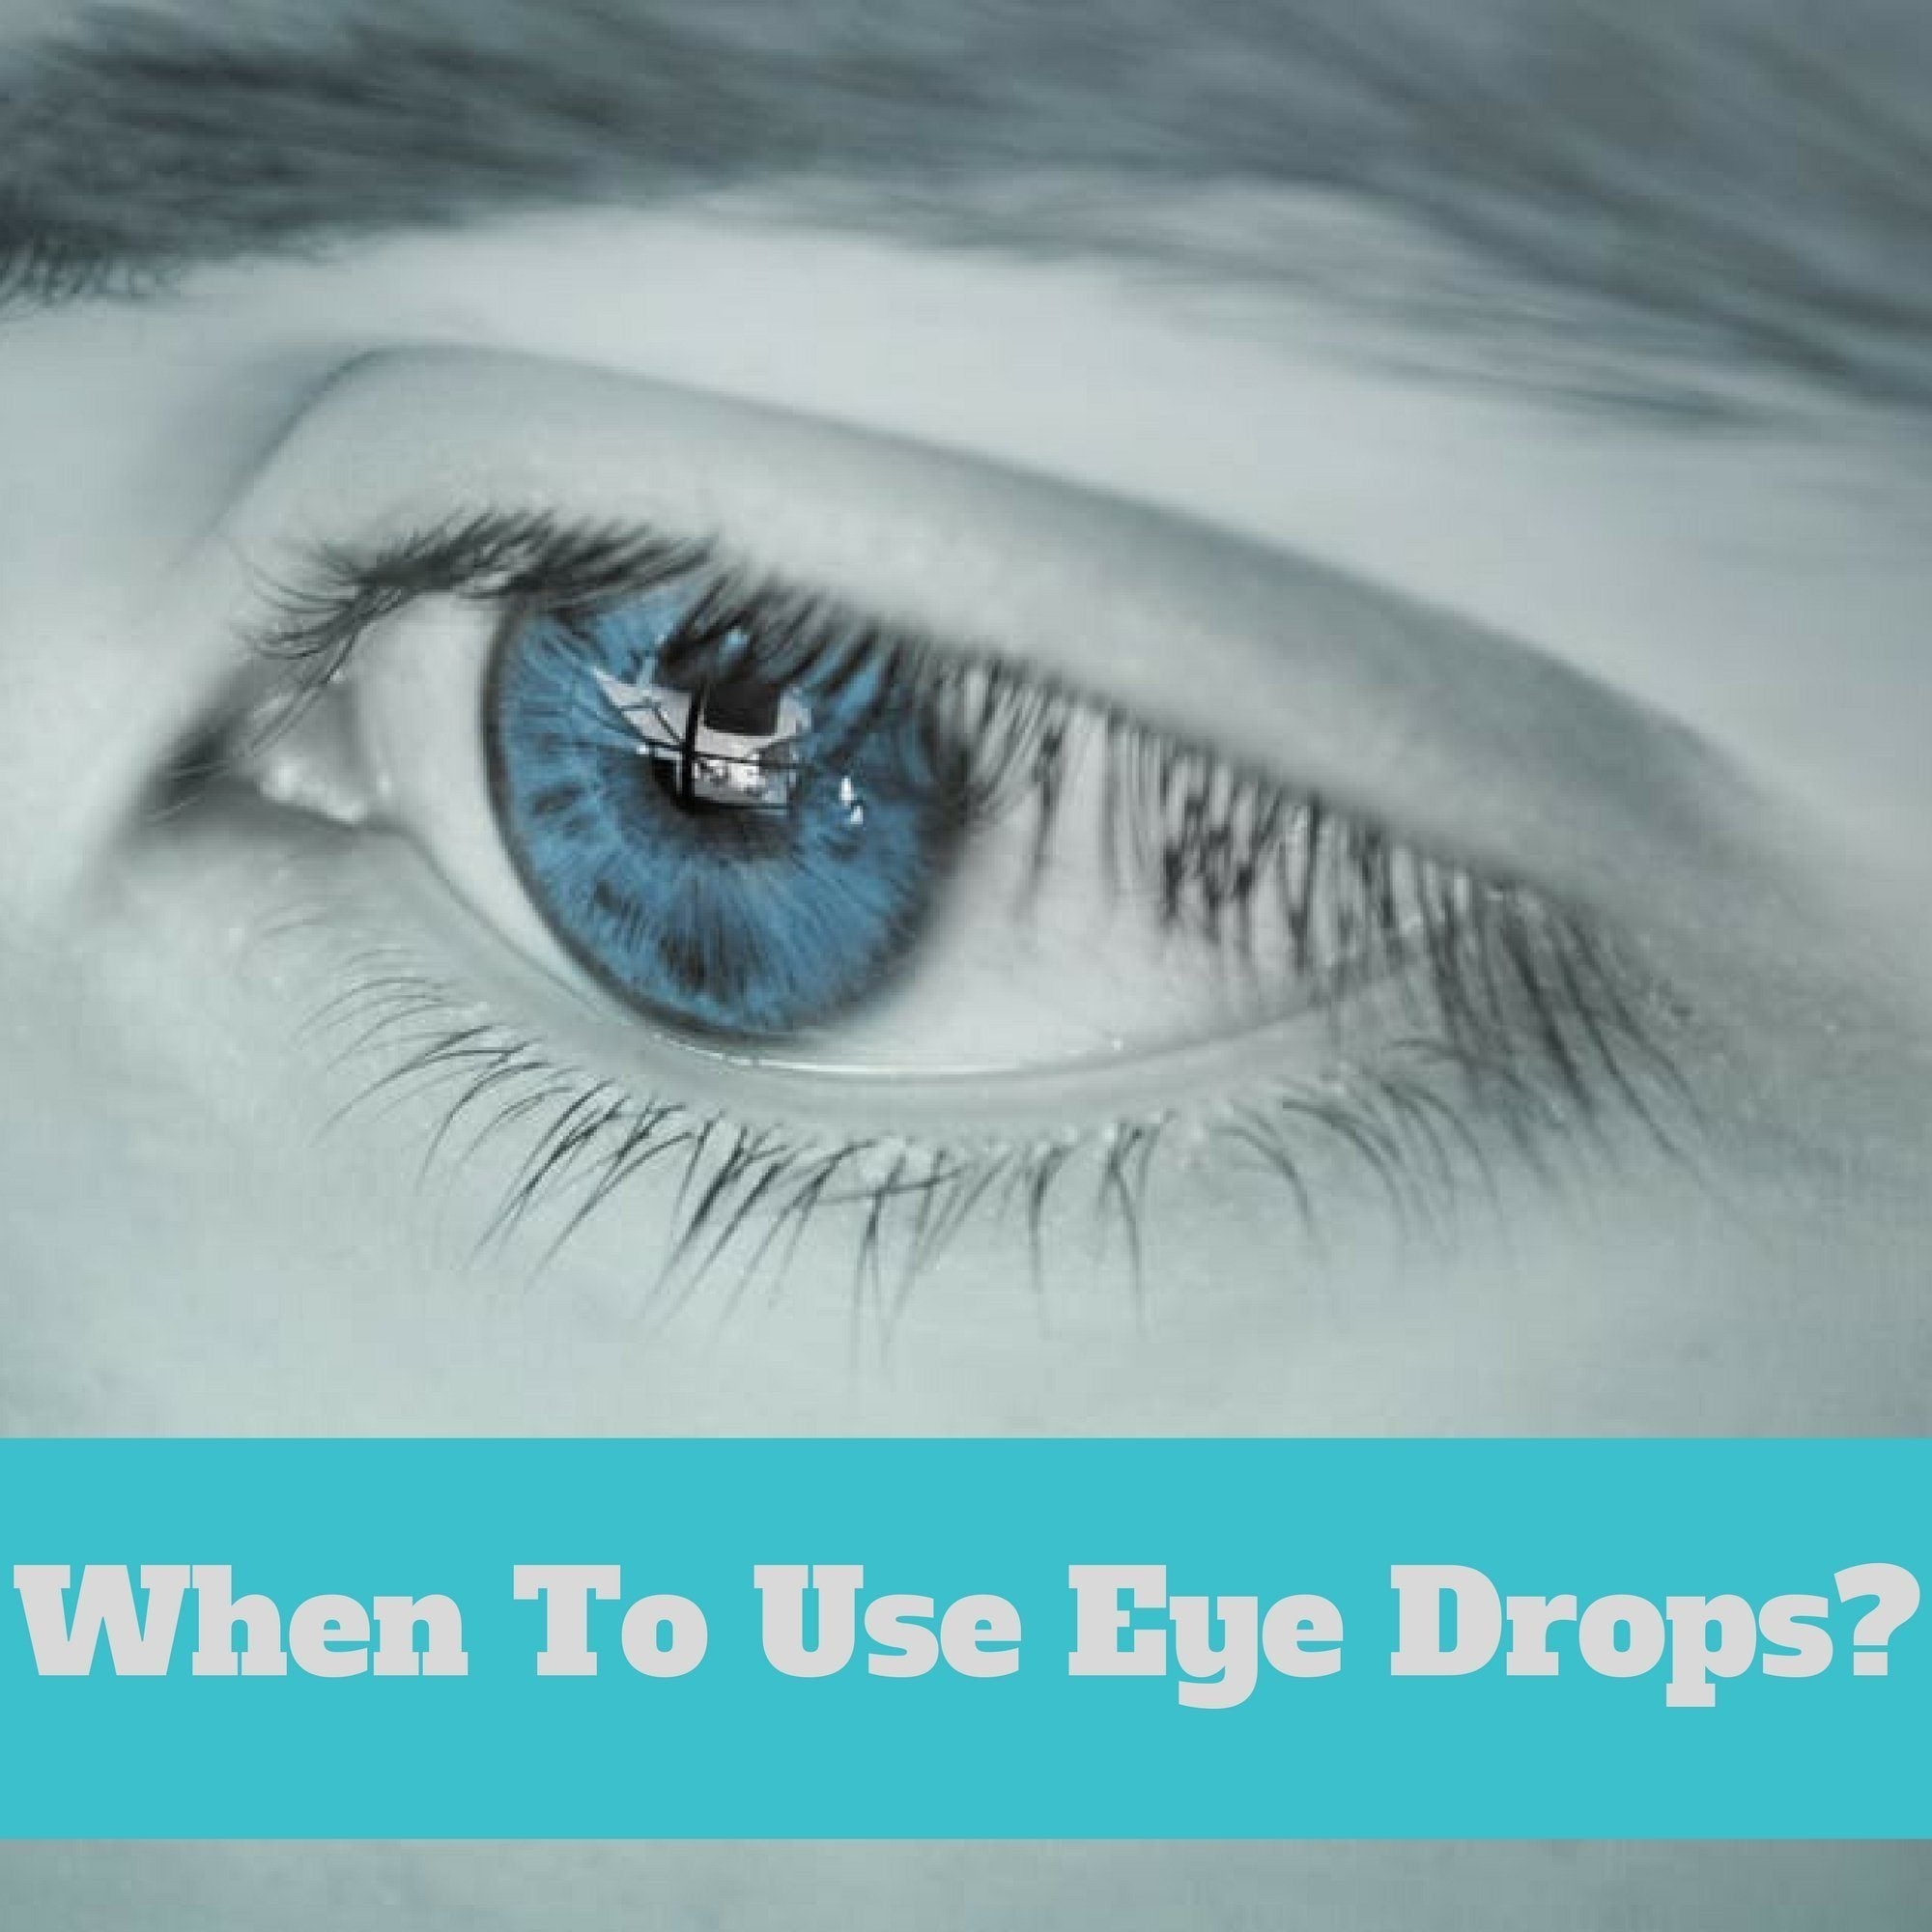 When To Use Eye Drops?